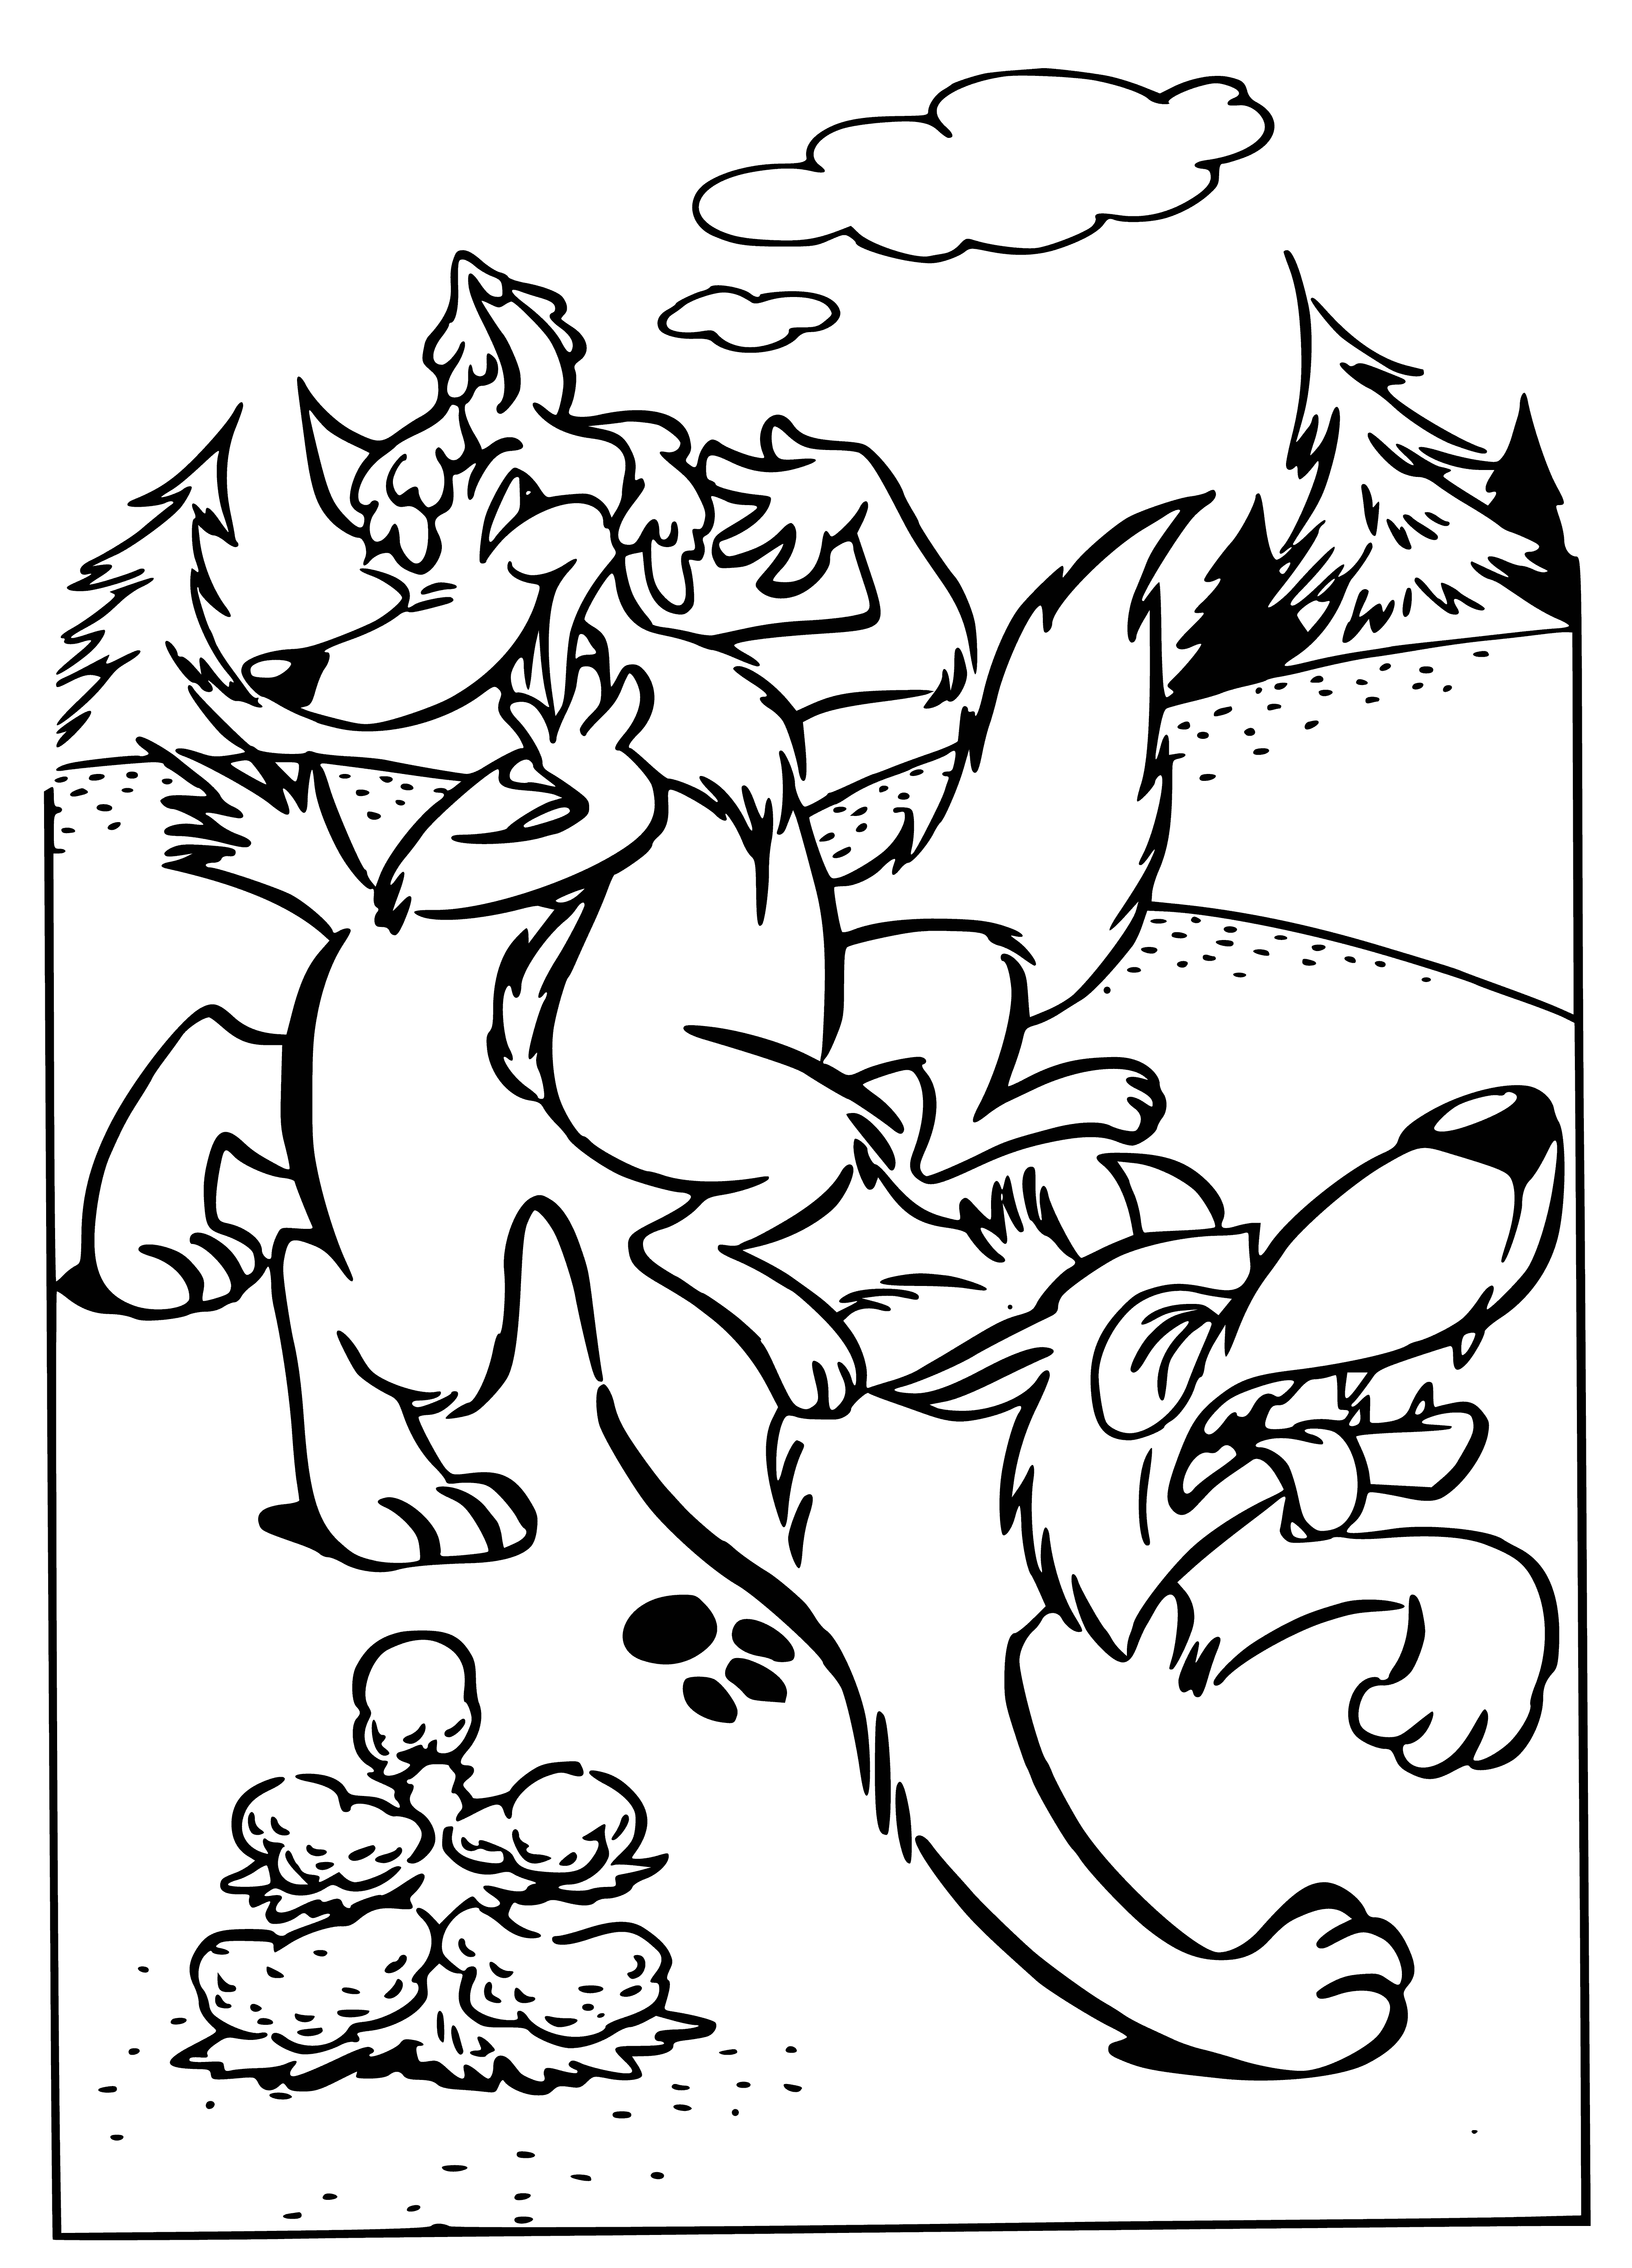 coloring page: 3 friends try to guess an owner's riddle to gain shelter from a storm, but only the mouse survives. It's the cat's dinner.